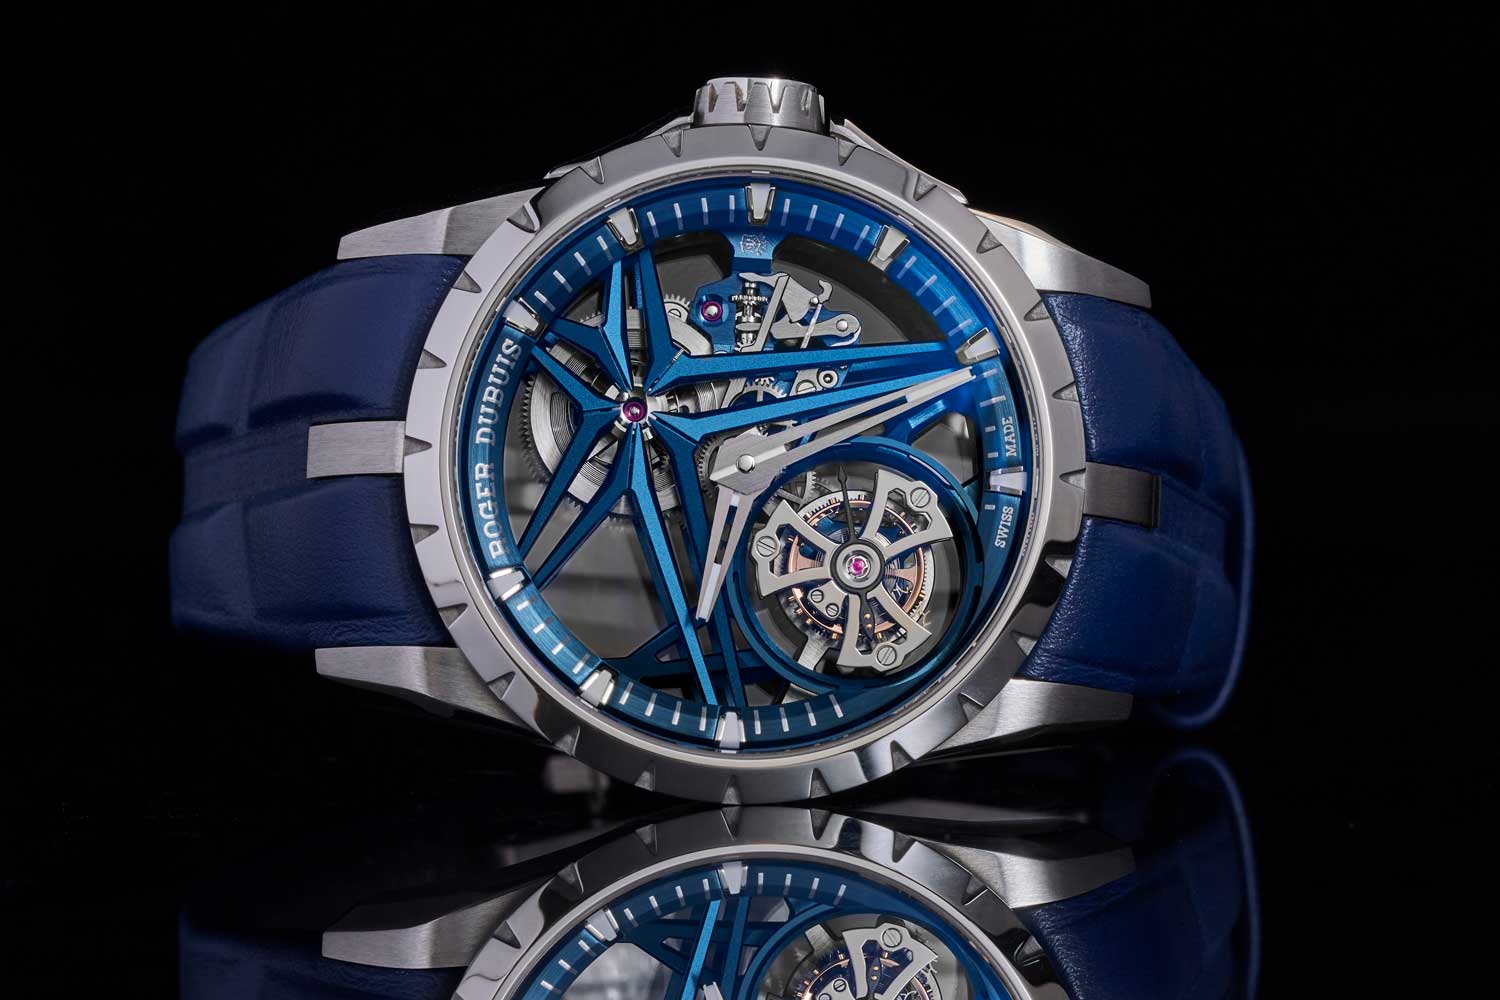 Roger Dubuis Excalibur Single Flying Tourbillon in white gold with a blue CVD coated double surface flange (© Revolution)